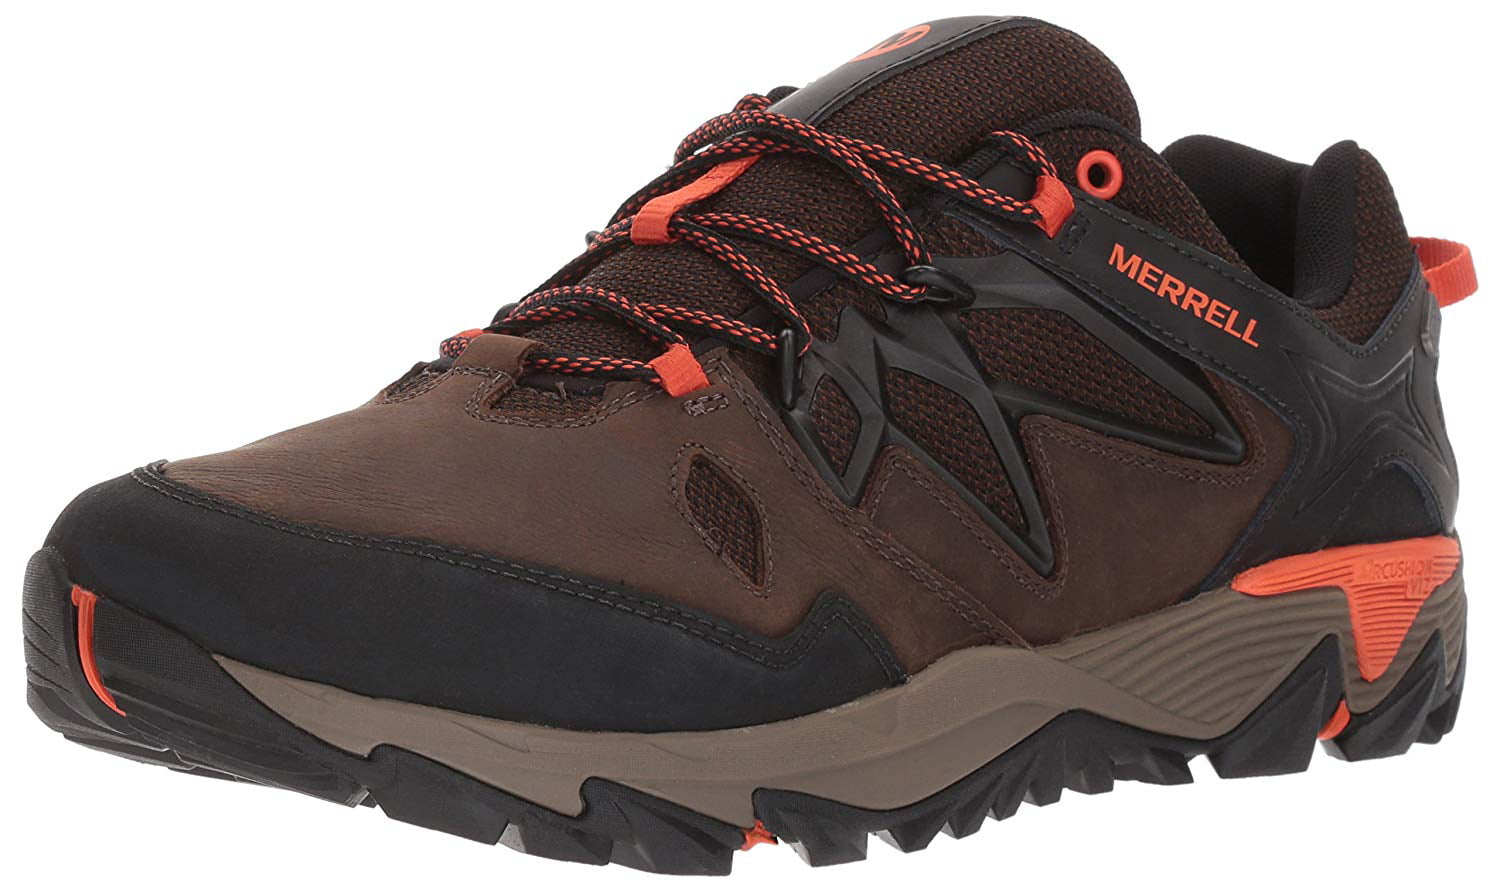 Merrell Mens All Out Blaze 2 GORE-TEX Walking Shoes Brown Sports Trainers 